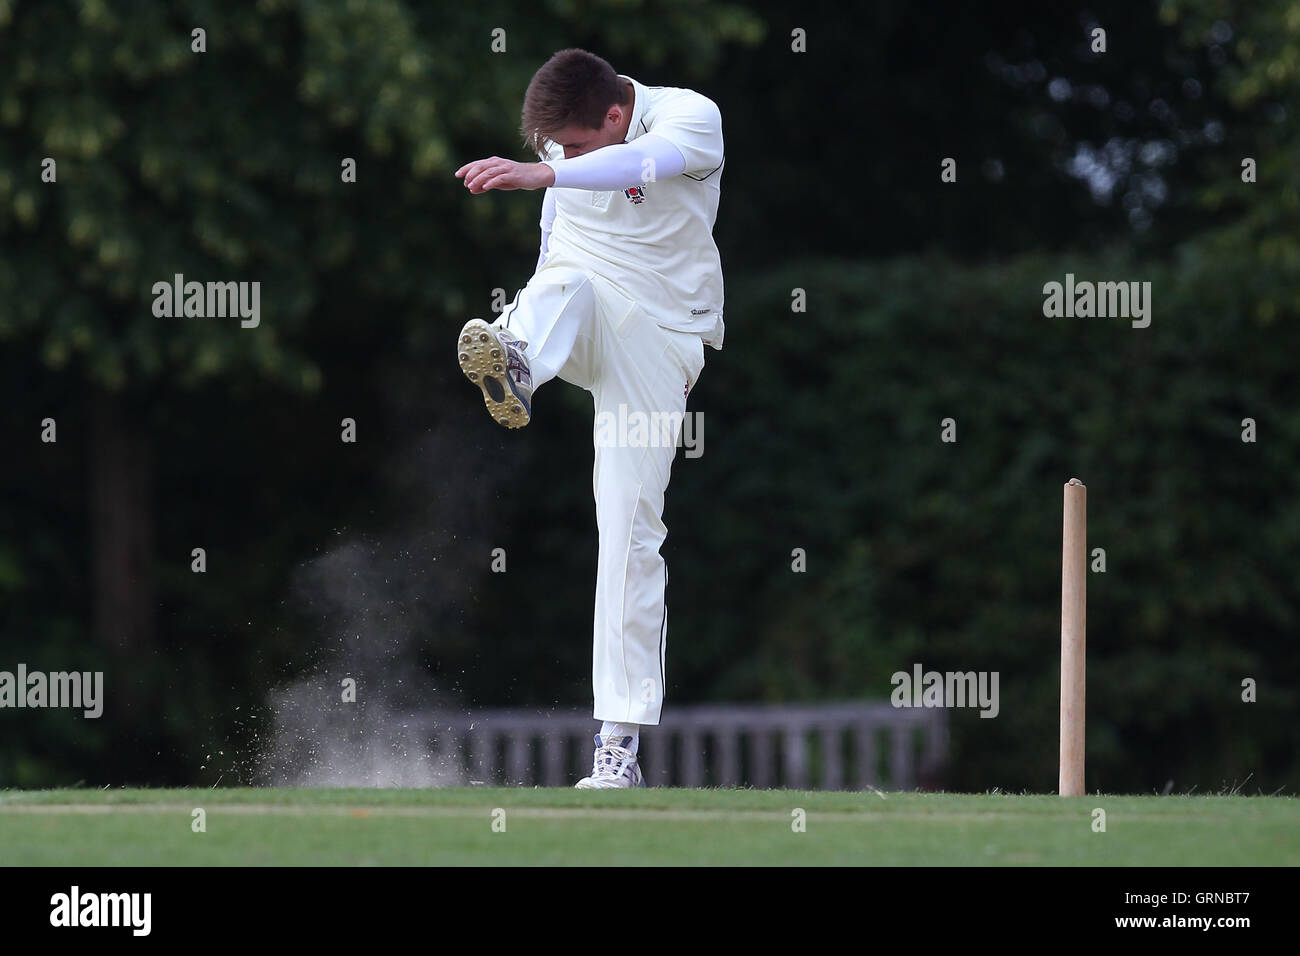 Frustration for Havering as the ball flies over the boundary for six runs - Herongate CC vs Havering-atte-Bower CC - Mid-Essex Cricket League - 21/06/14 Stock Photo